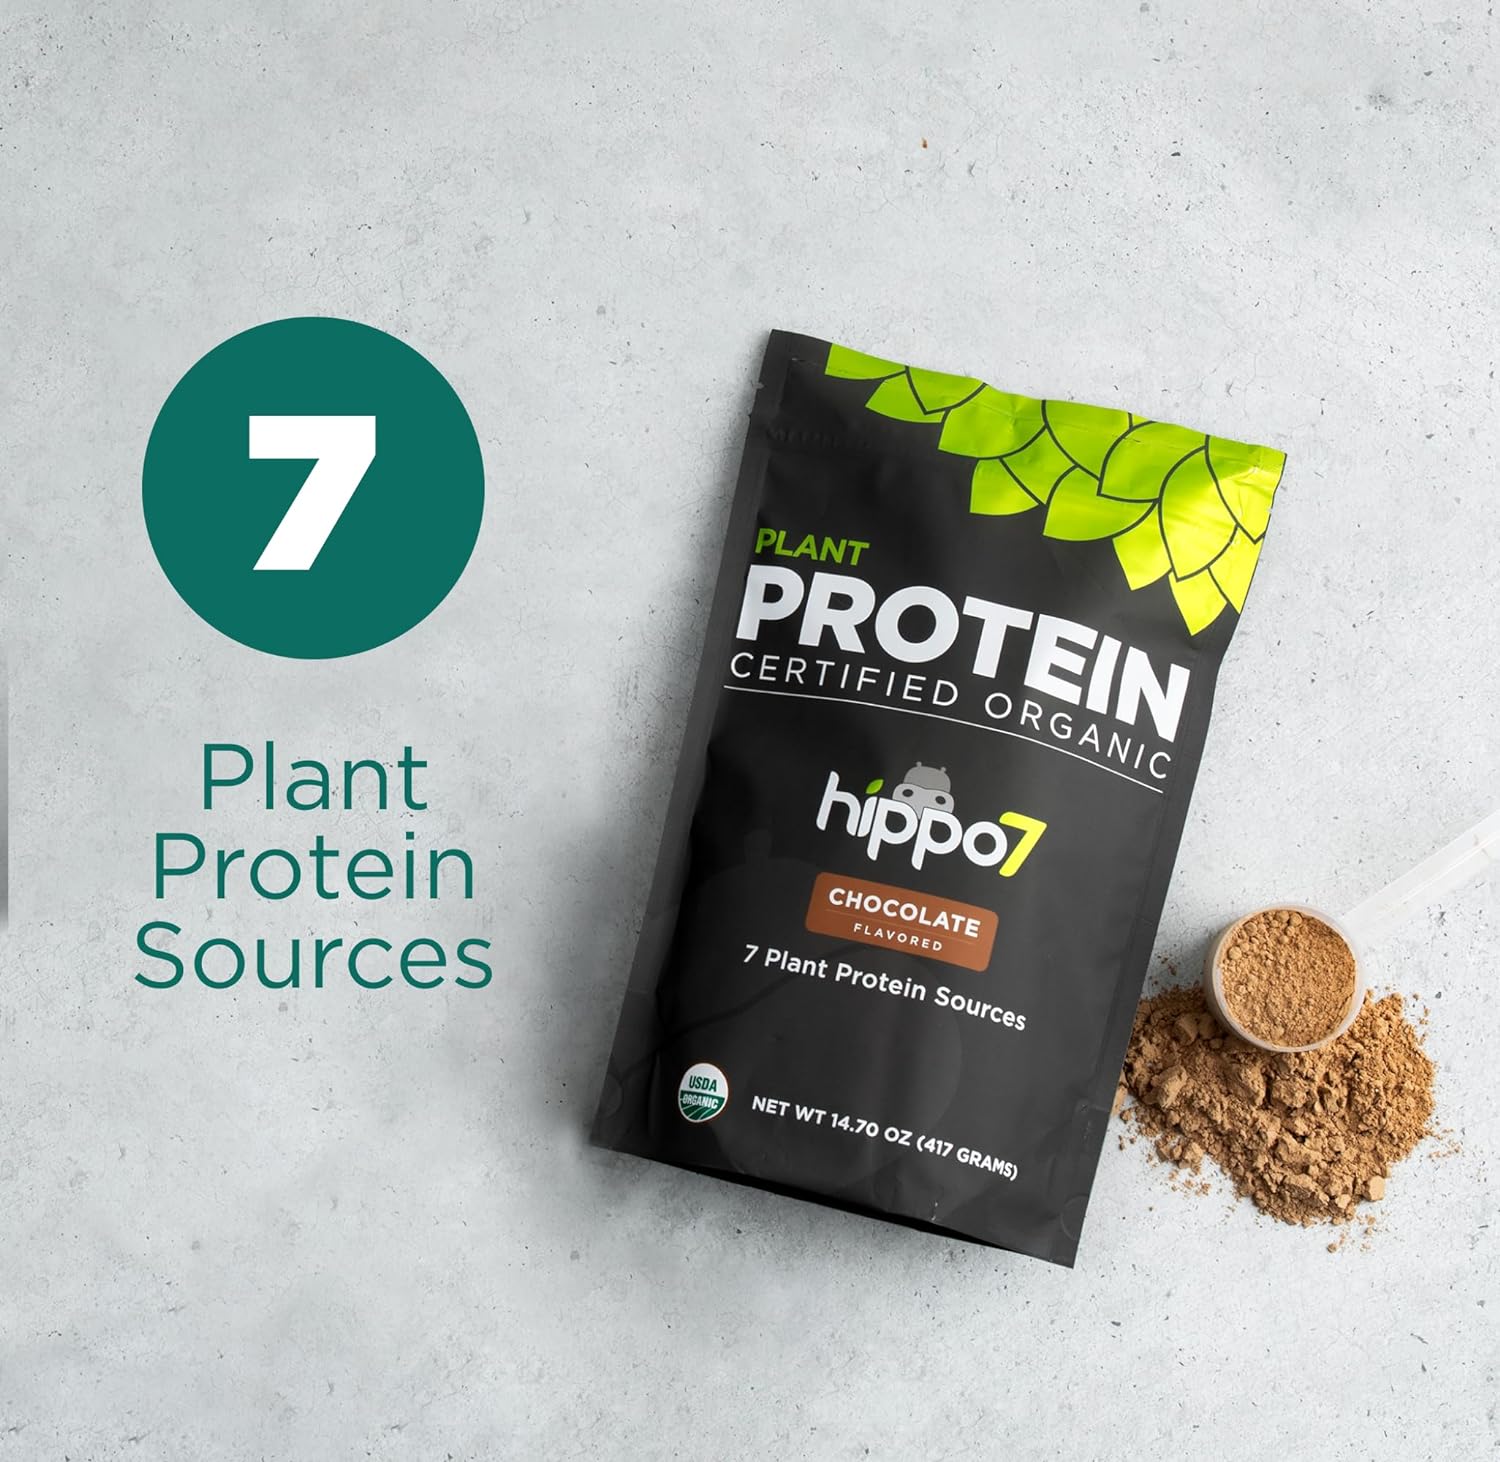 Hippo7 Vegan Plant Protein Powder, Chocolate Flavored – Non GMO & Gluten Free, Protein from Plant Sources Including Pea & Hemp for Women and Men : Health & Household